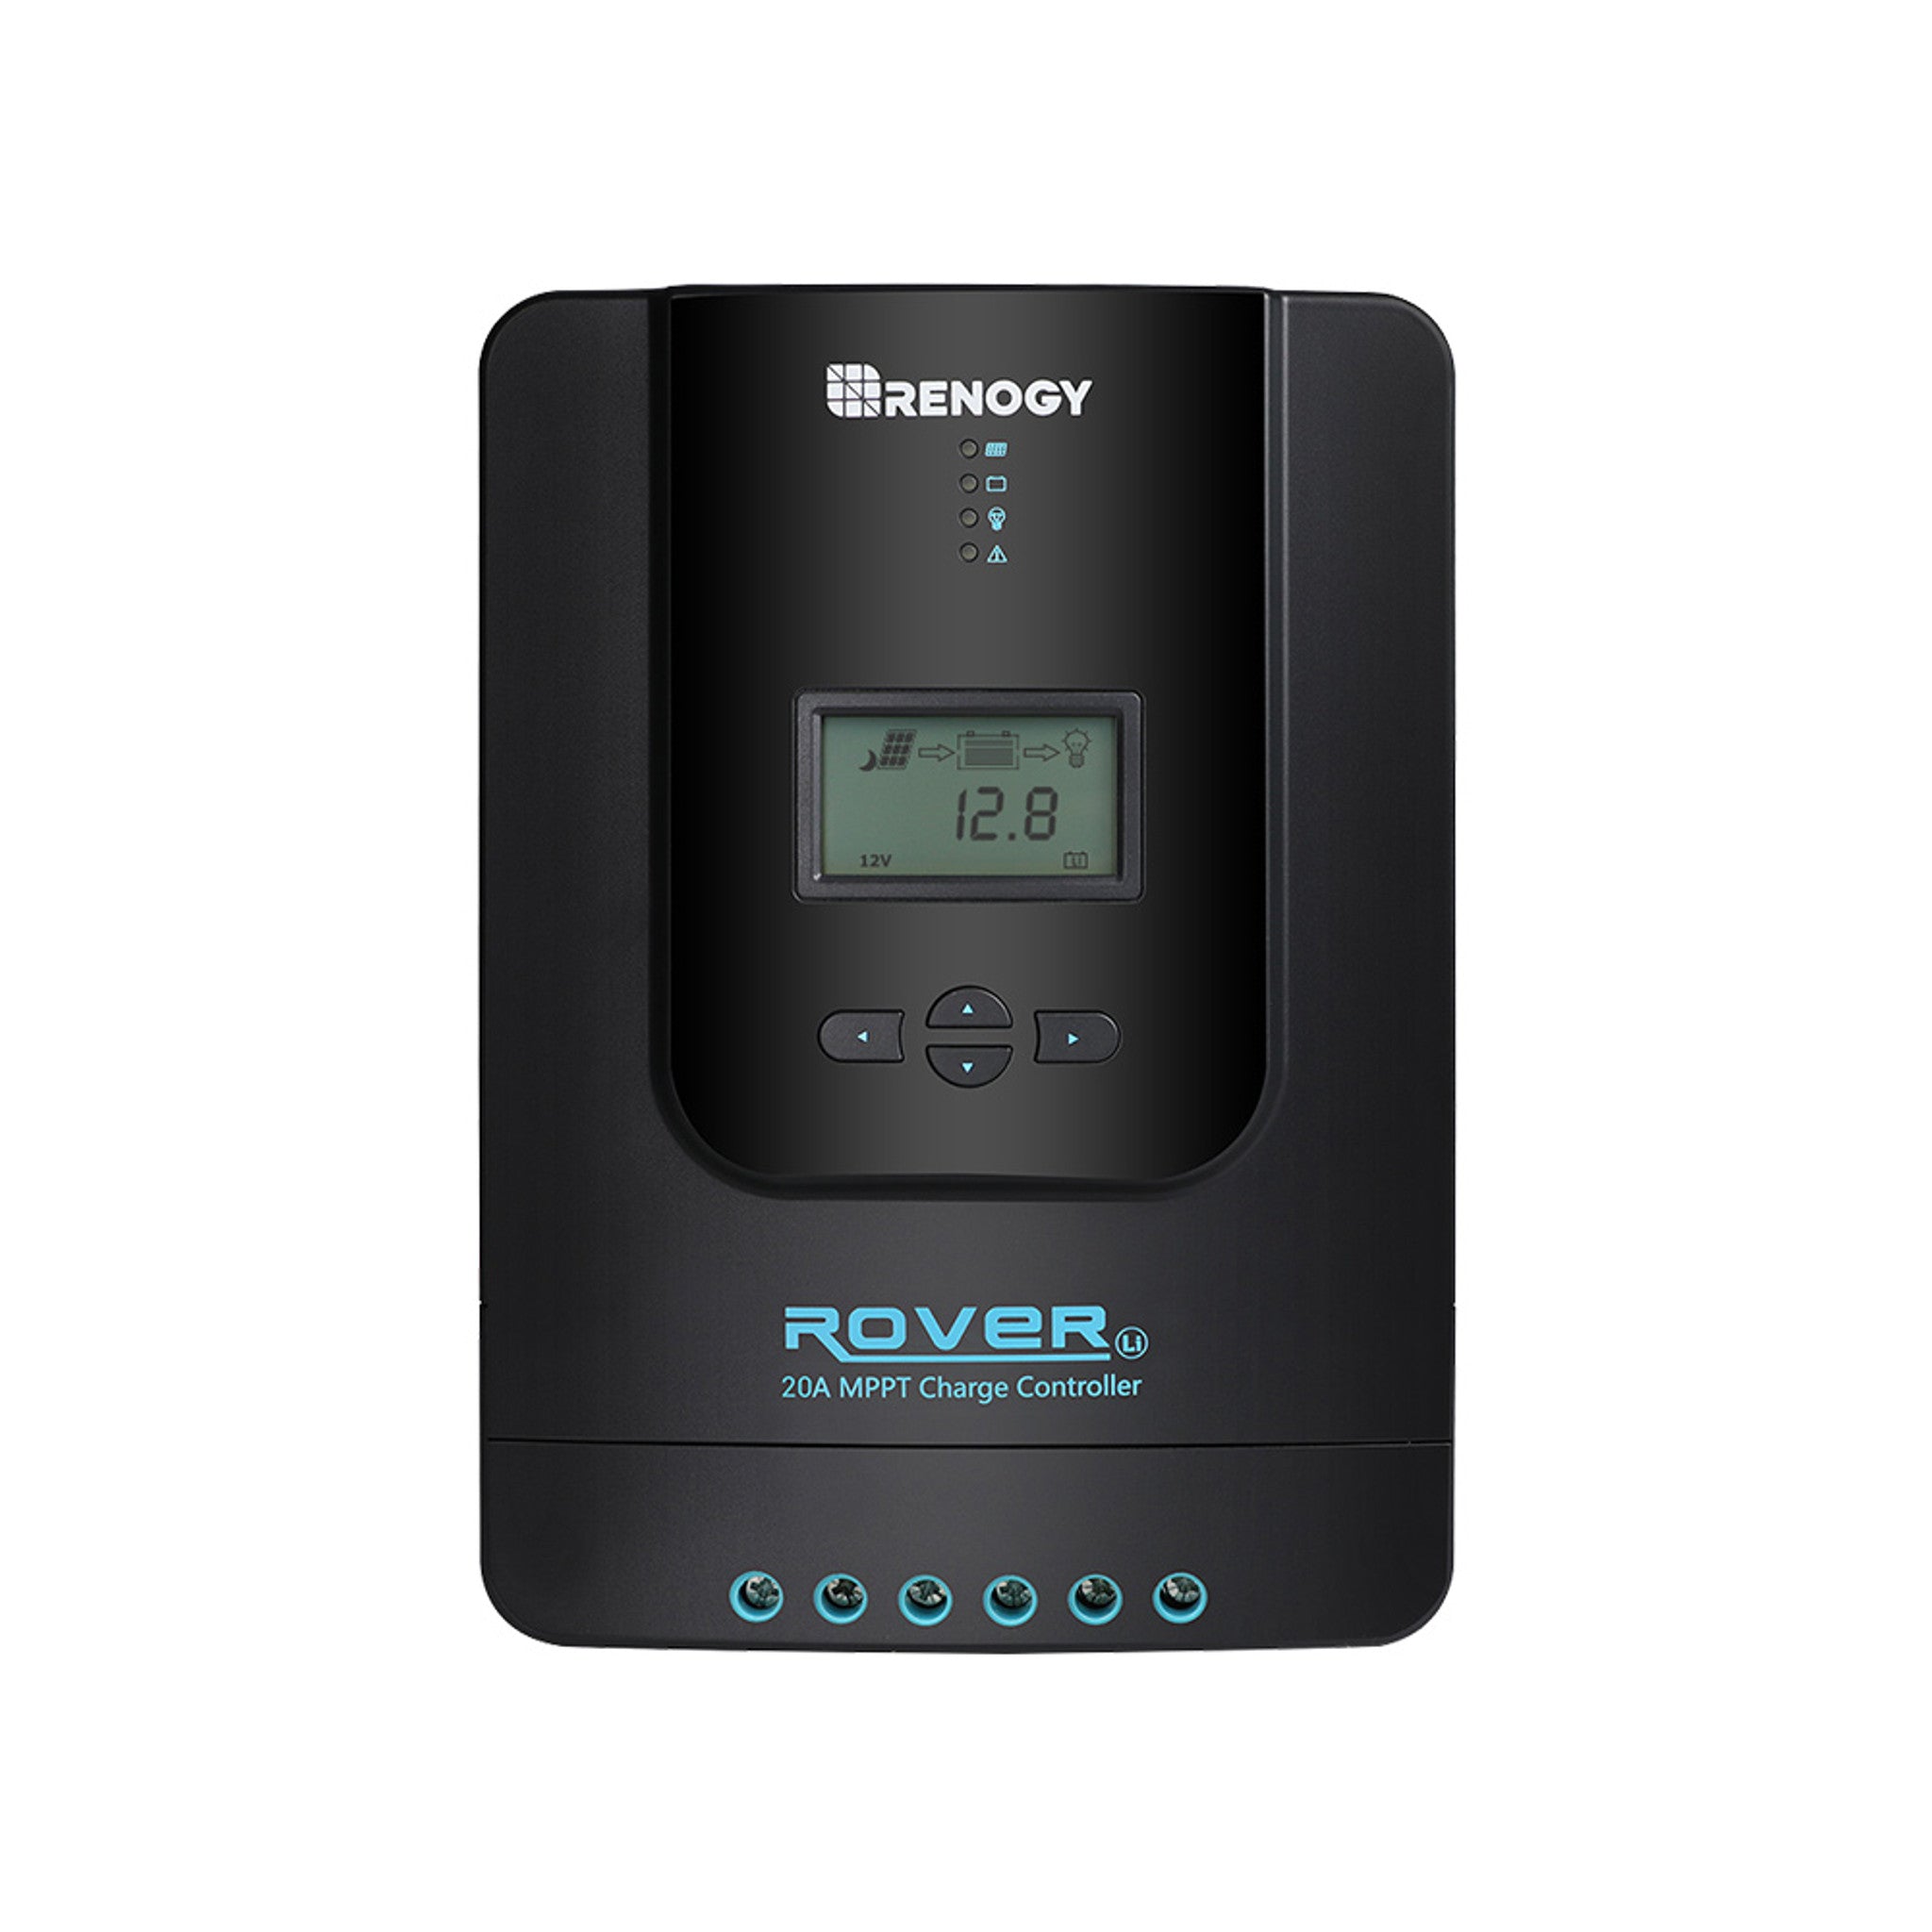 Renogy Rover Li 20 Amp MPPT Solar Charge Controller with Bluetooth Module